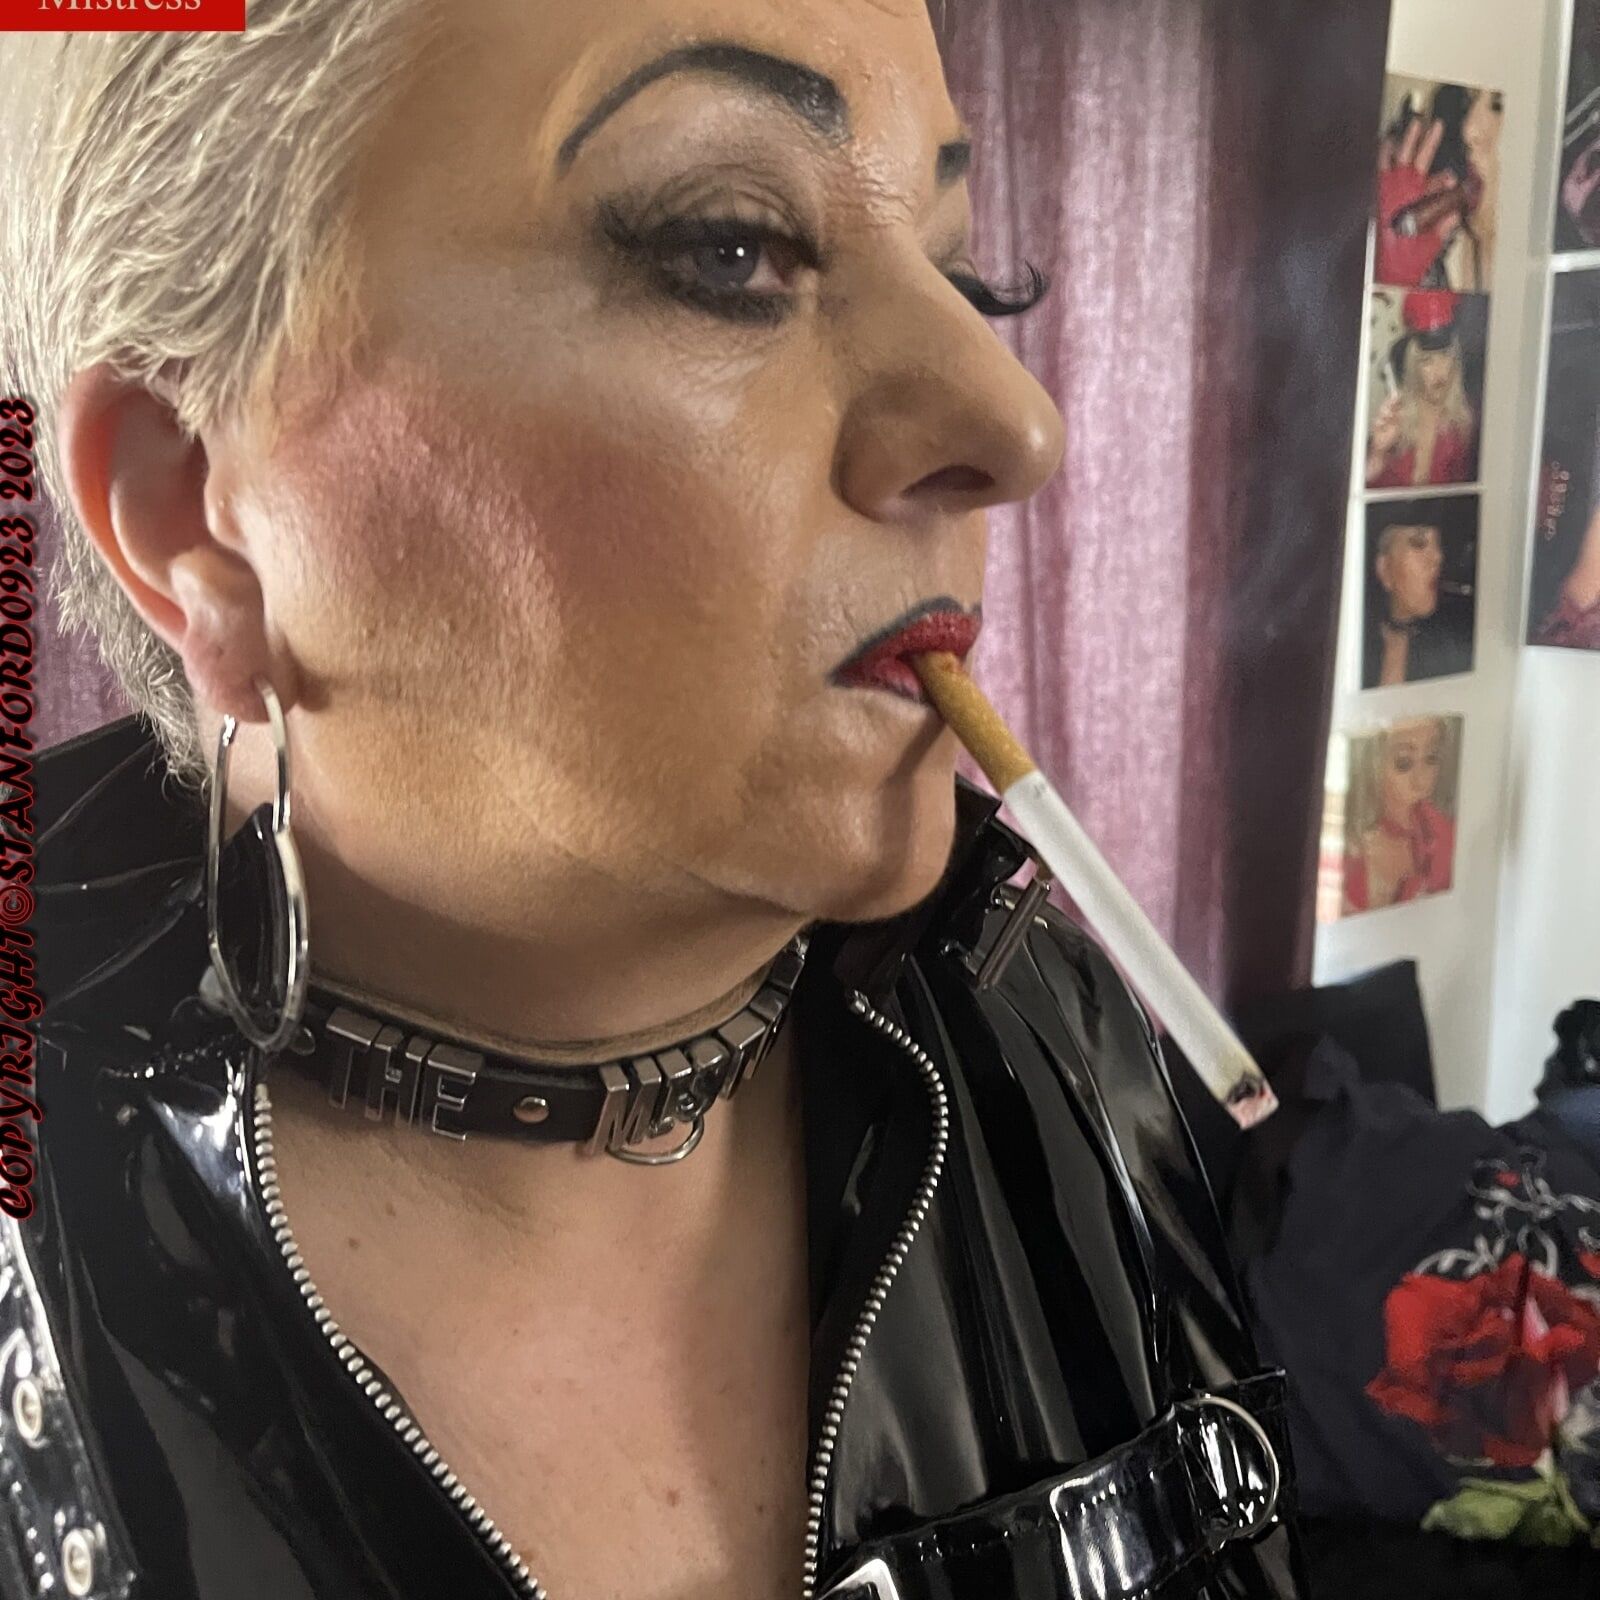 MISTRESS SHIRLEY IS READY SISSY TO FUCK YOU #8